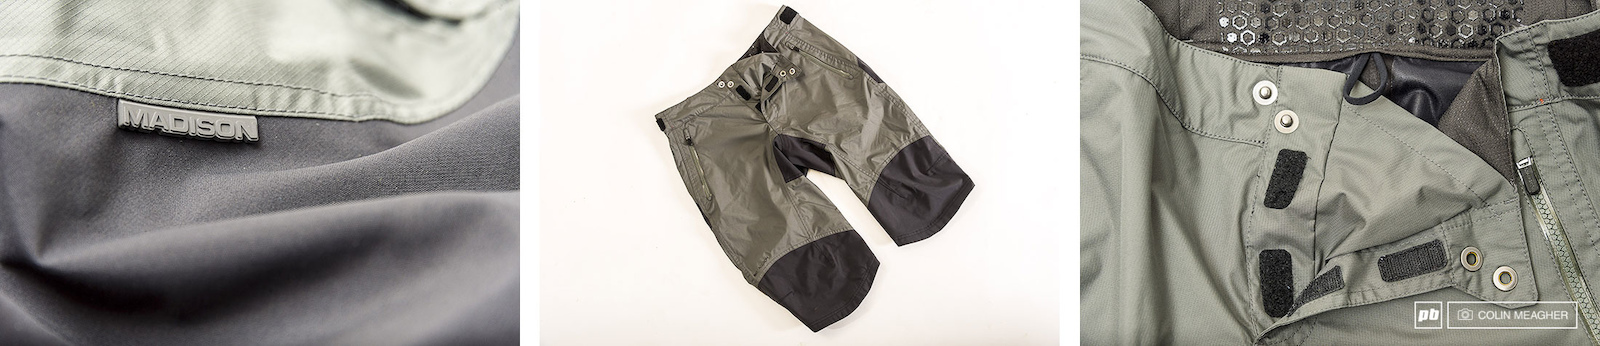 Madison's DTE Waterproof short: so much awesome at such a good price. Details: 3 layer fabric in the high wear areas, double snaps on the fly, and a privacy patch to keep water out and privates, well, private; gripper elastic, and waist tab adjusters.